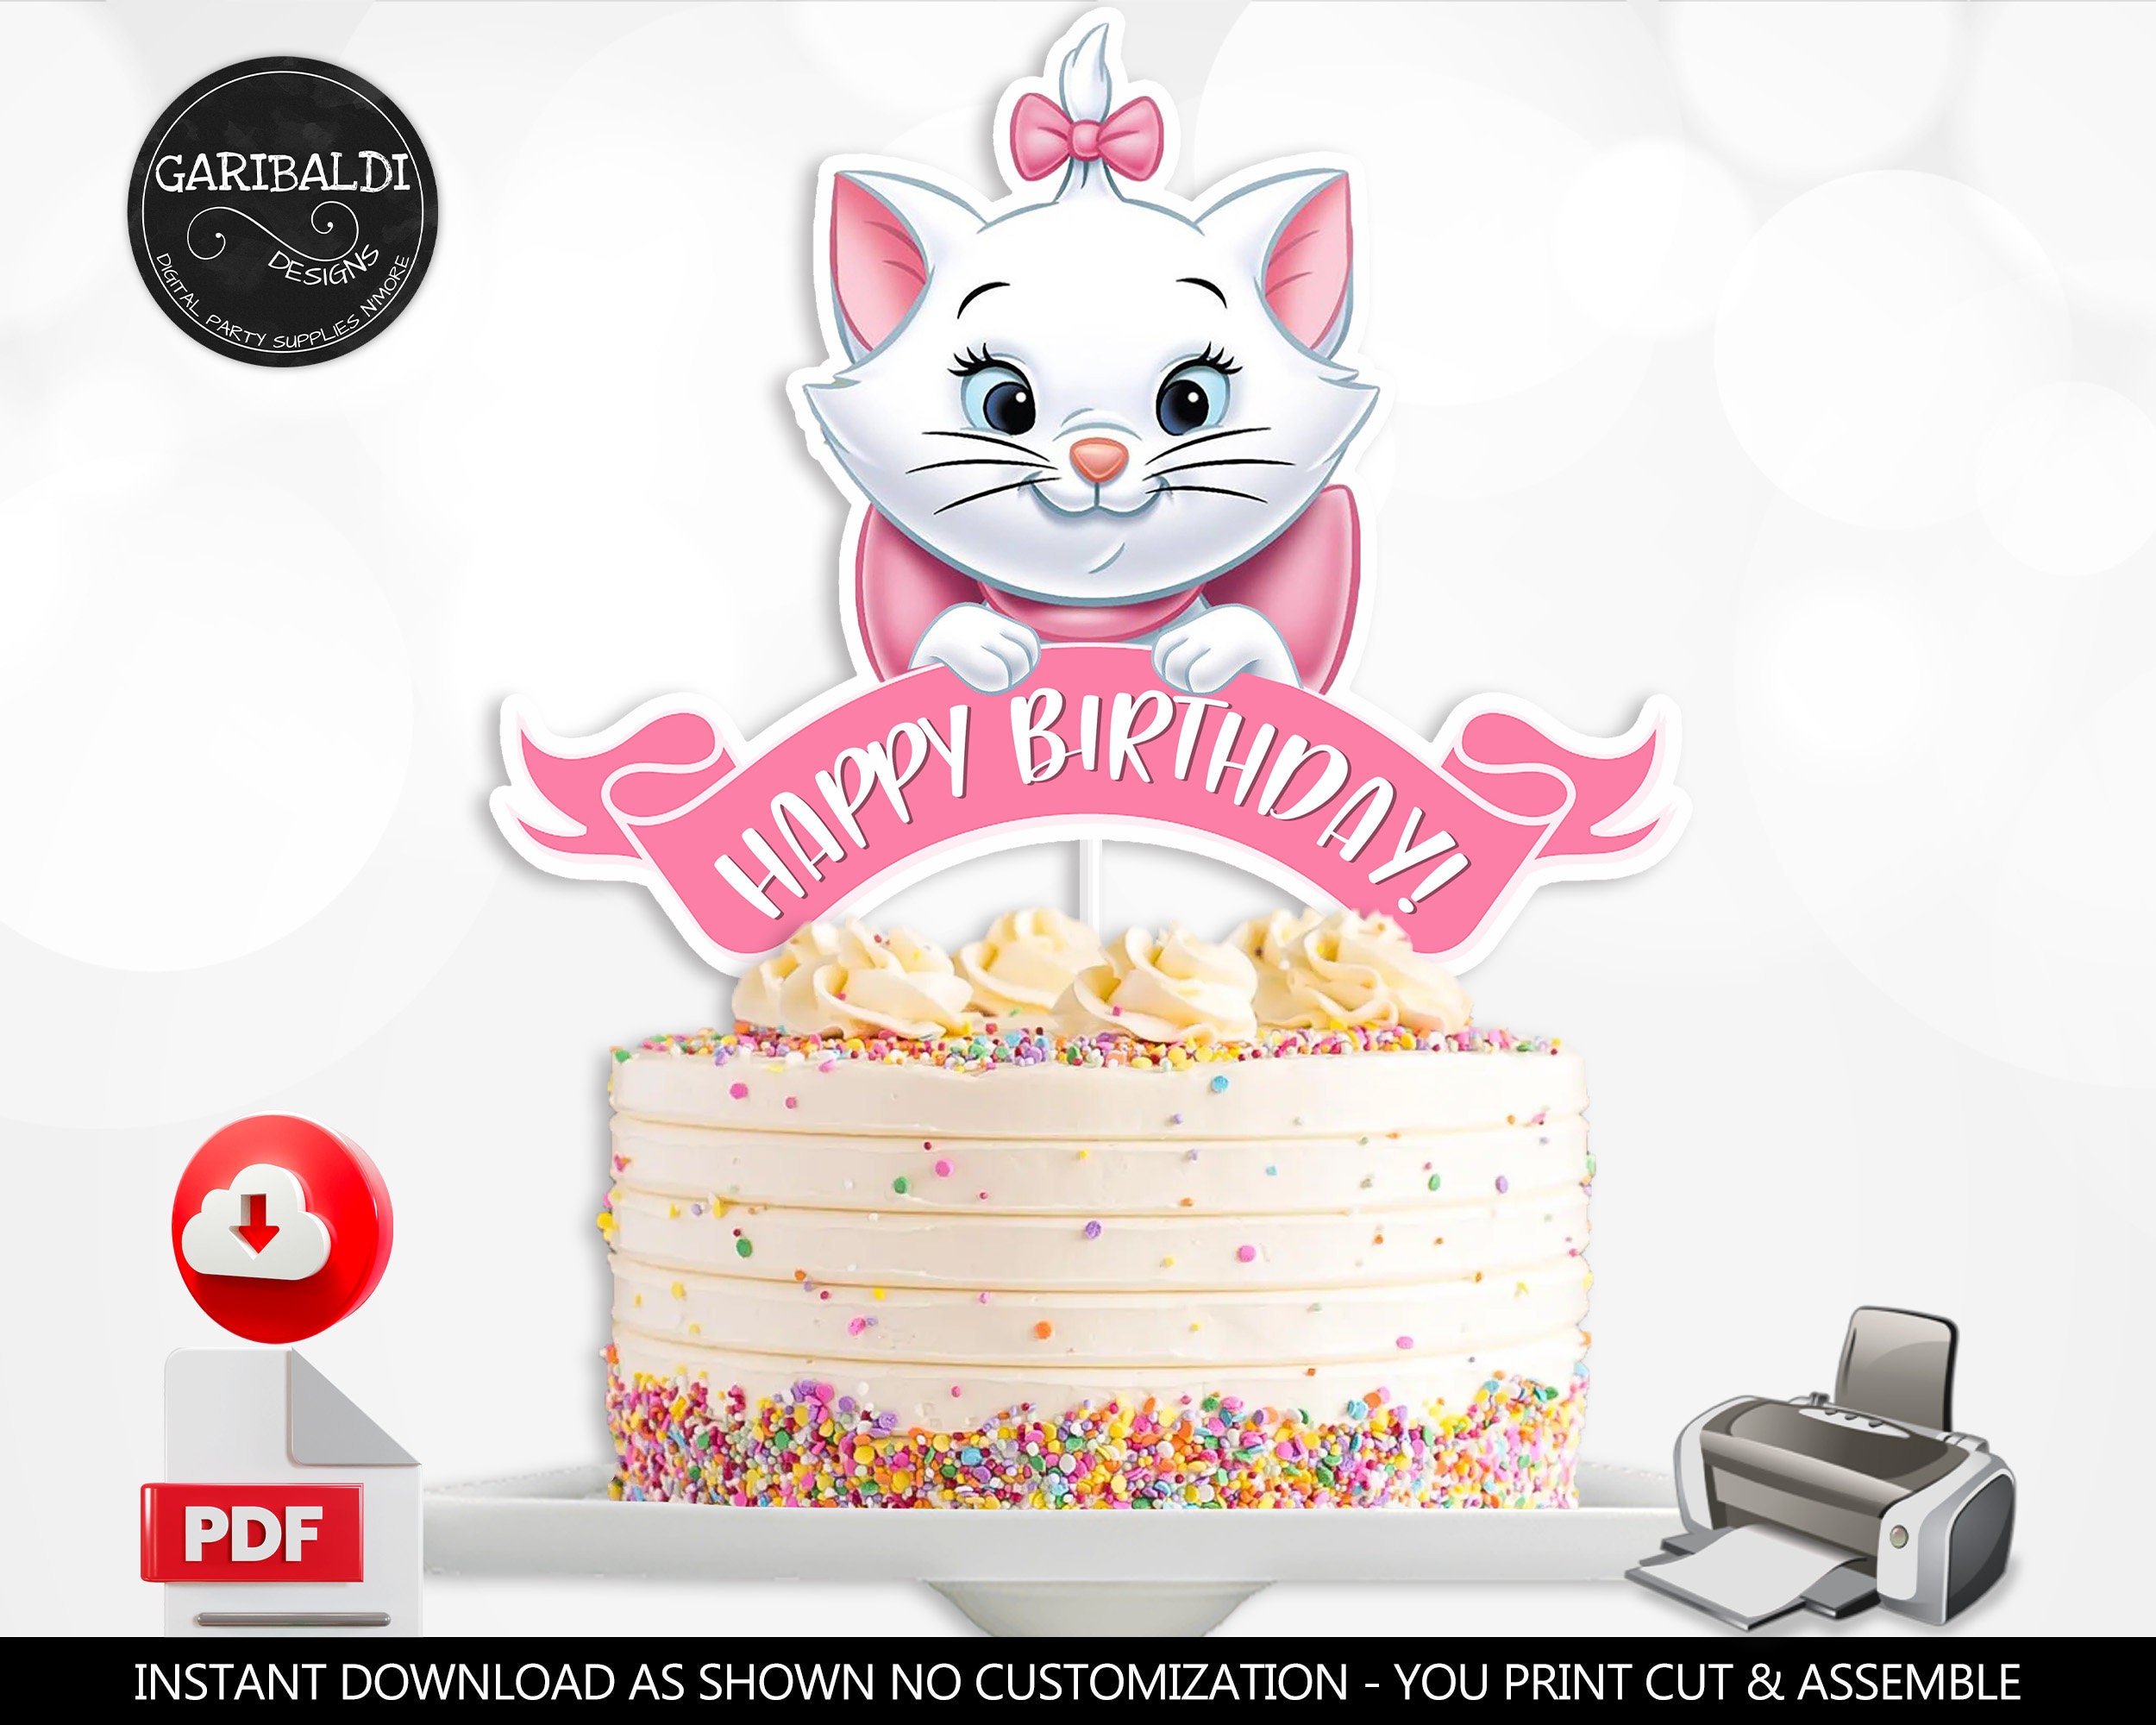 Feed My Paws SG - Handmade Birthday Cake for Kitty Cats - Singapore  Delivery - Since 2013 - Order Now